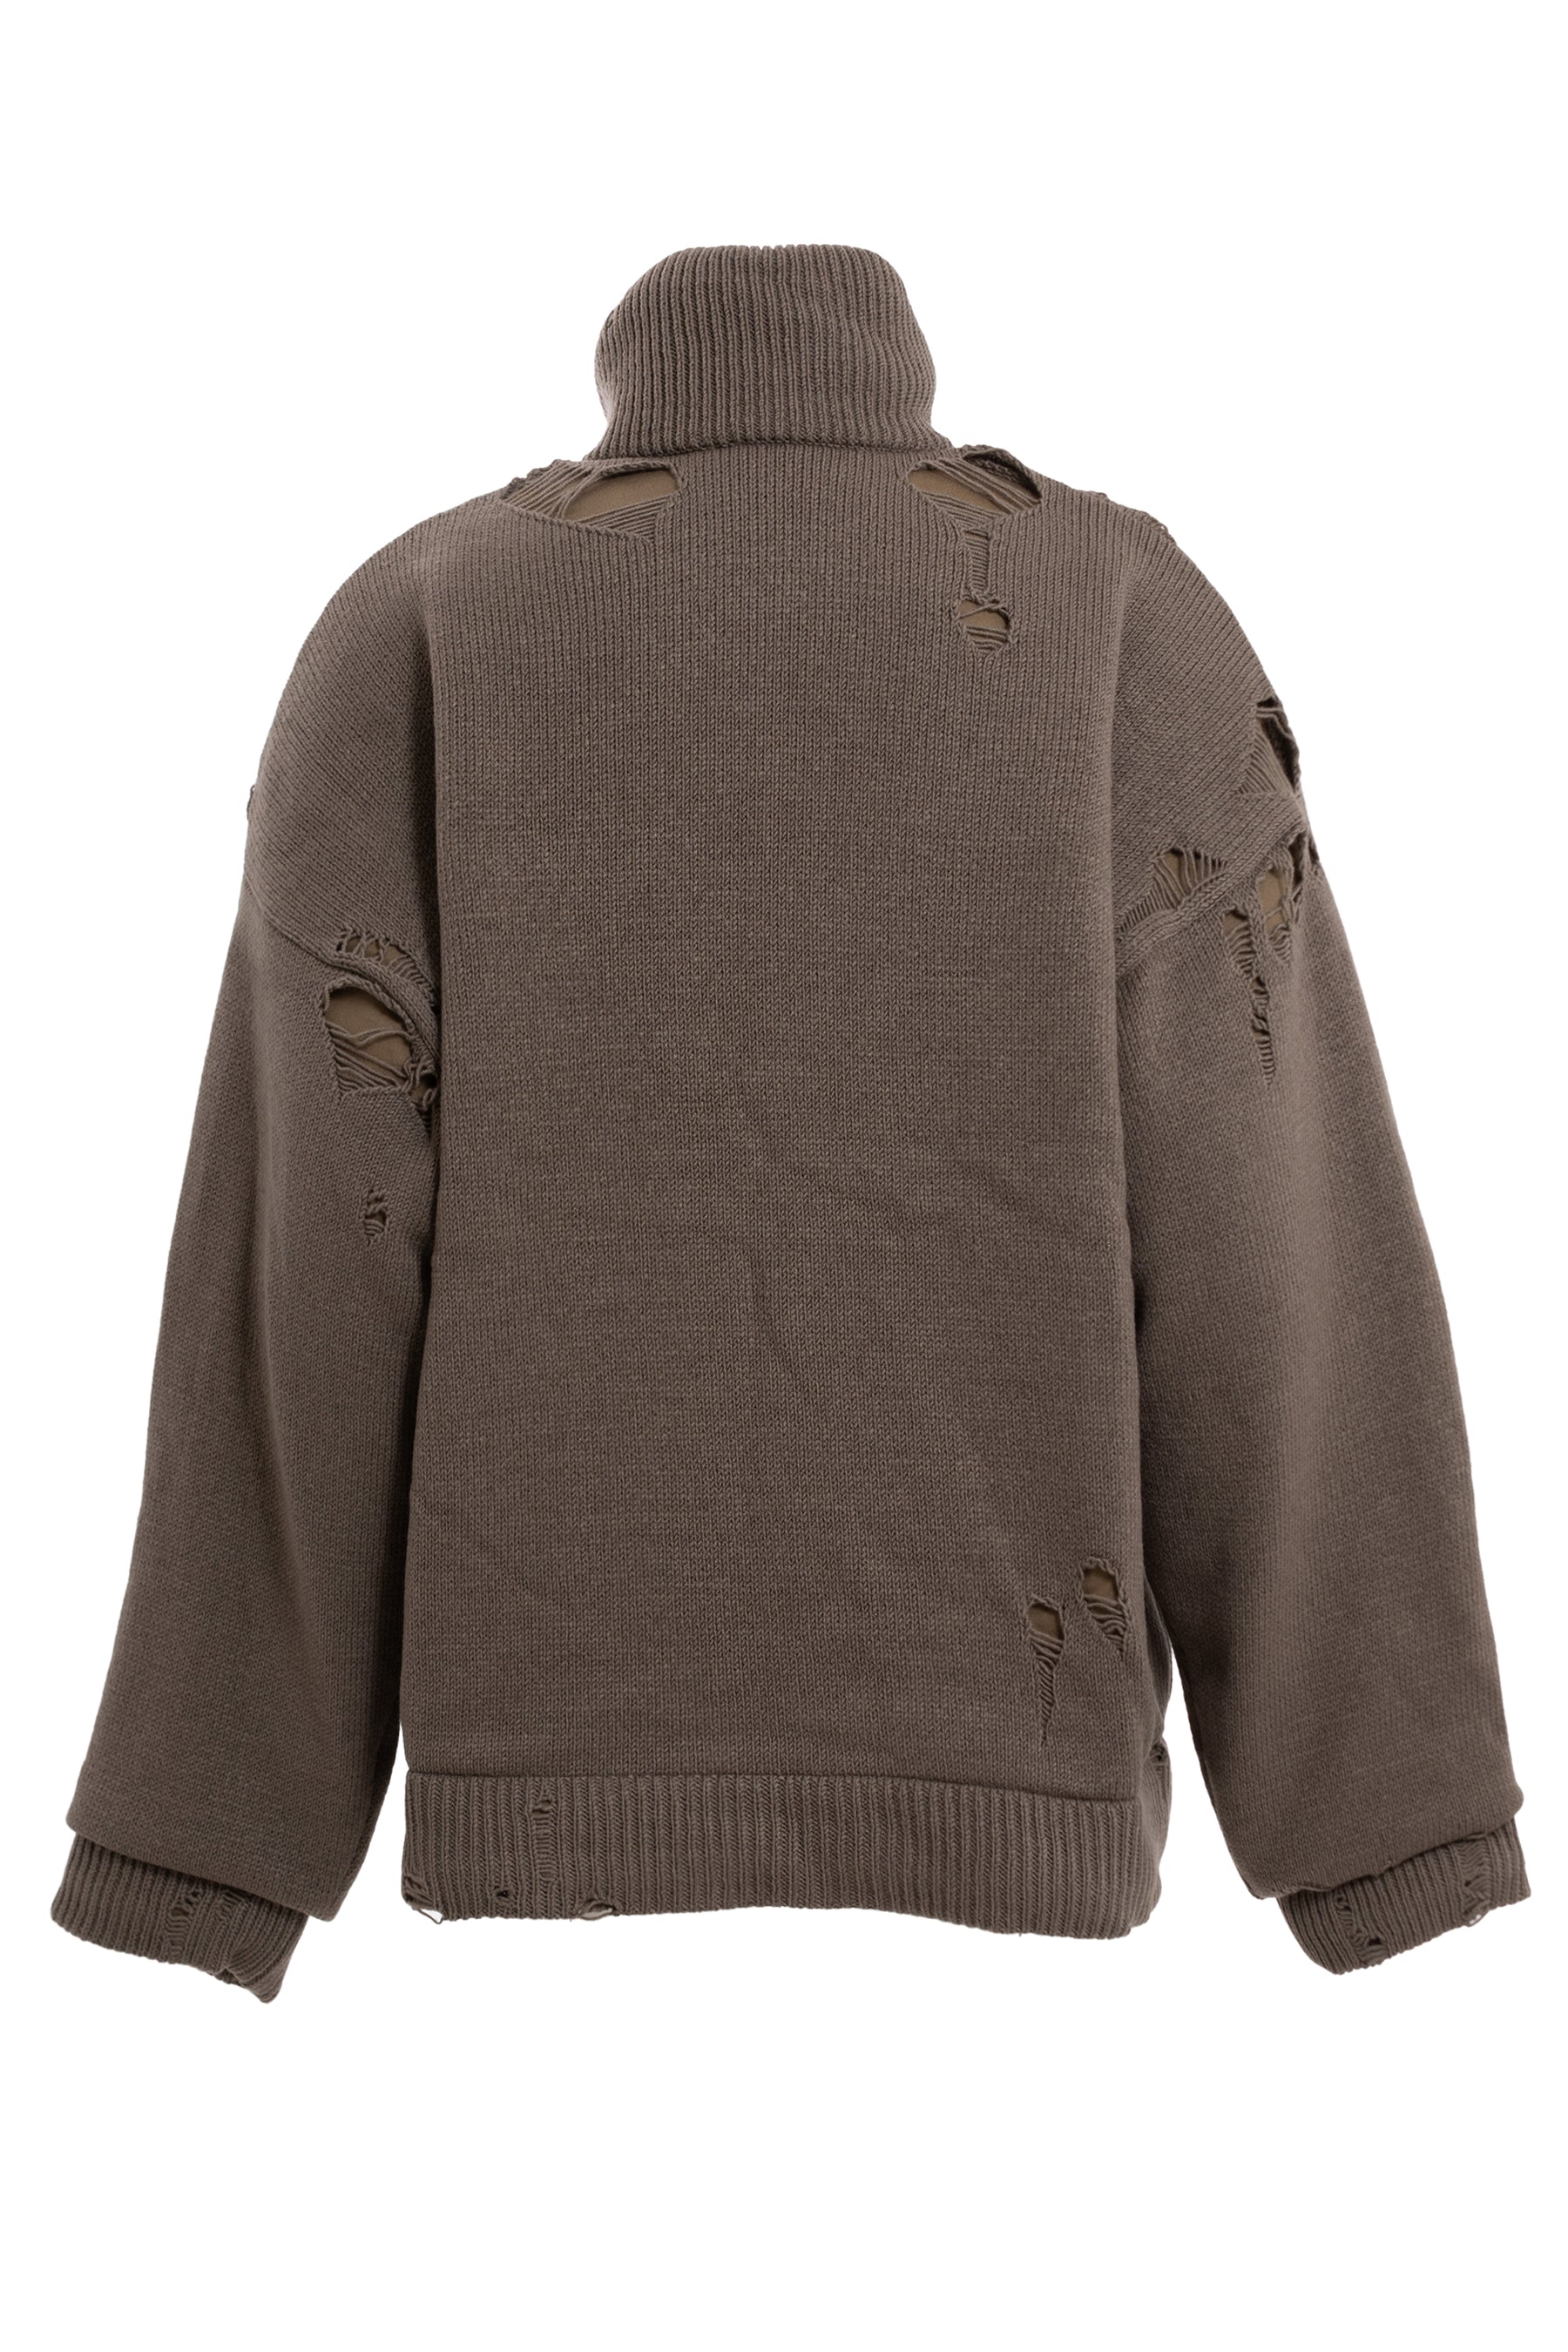 FORSOMEONE GRUNGE ARMY KNIT